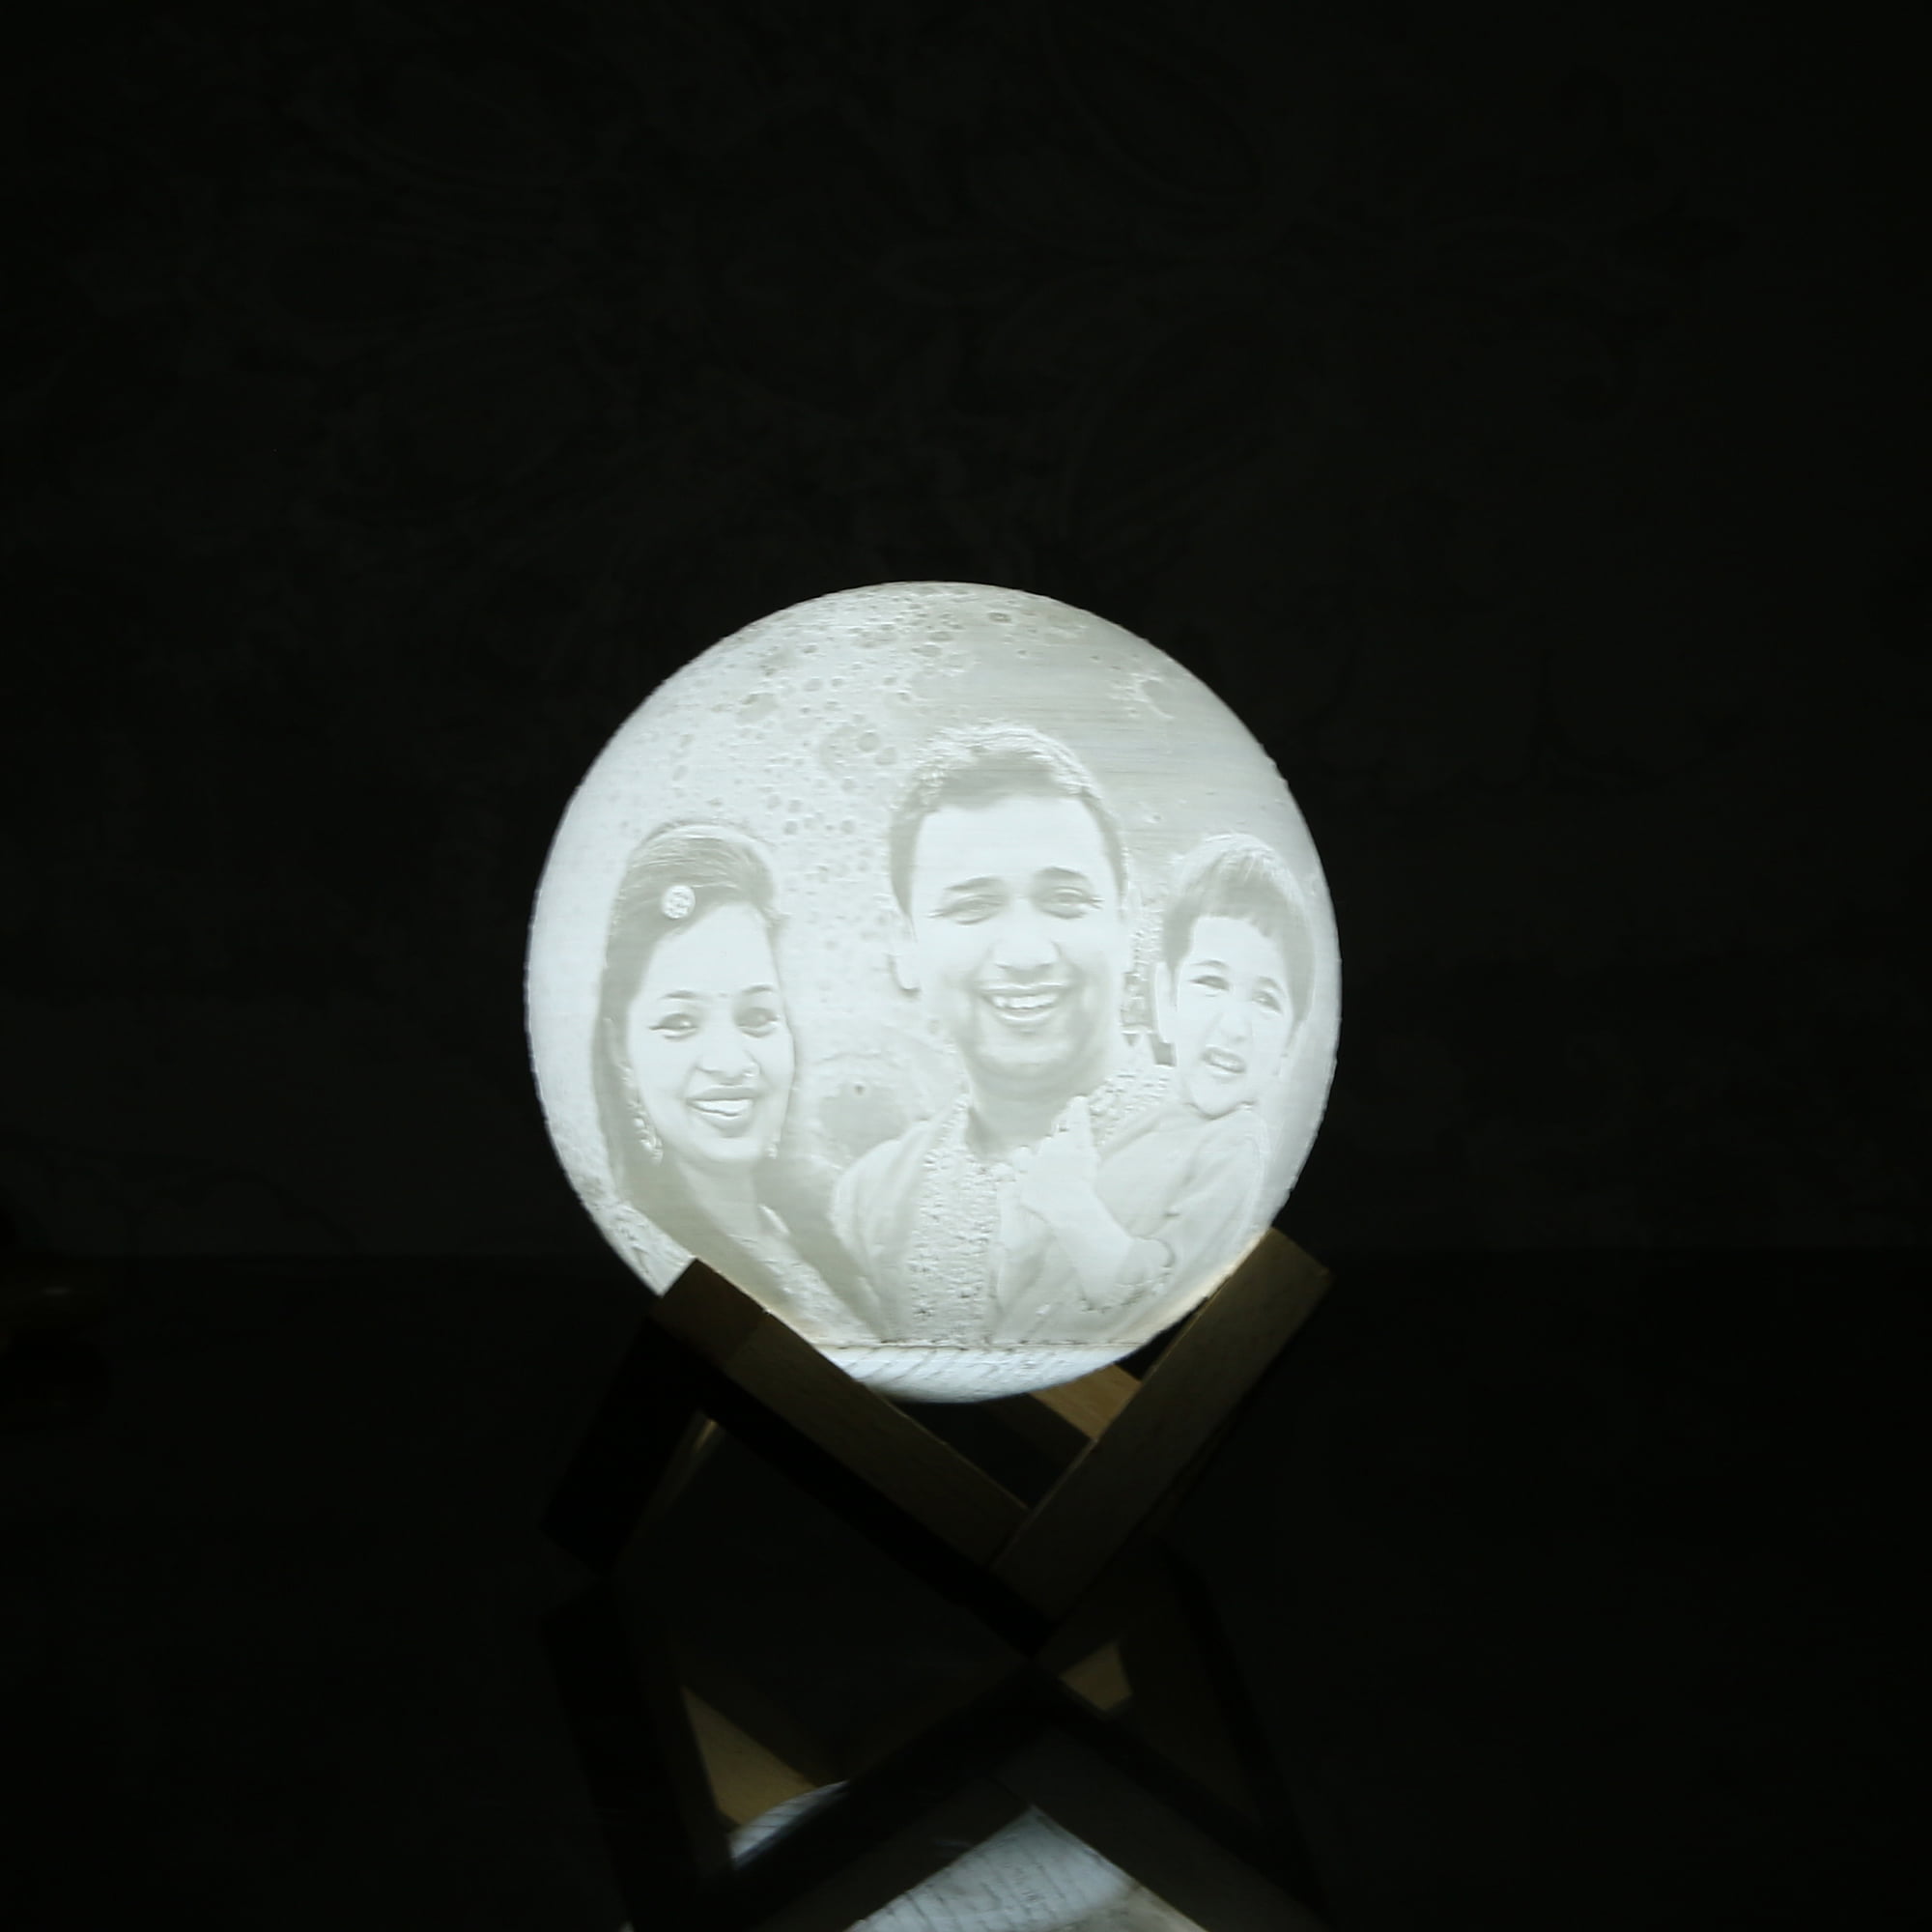 Personalized moon lamp with photo